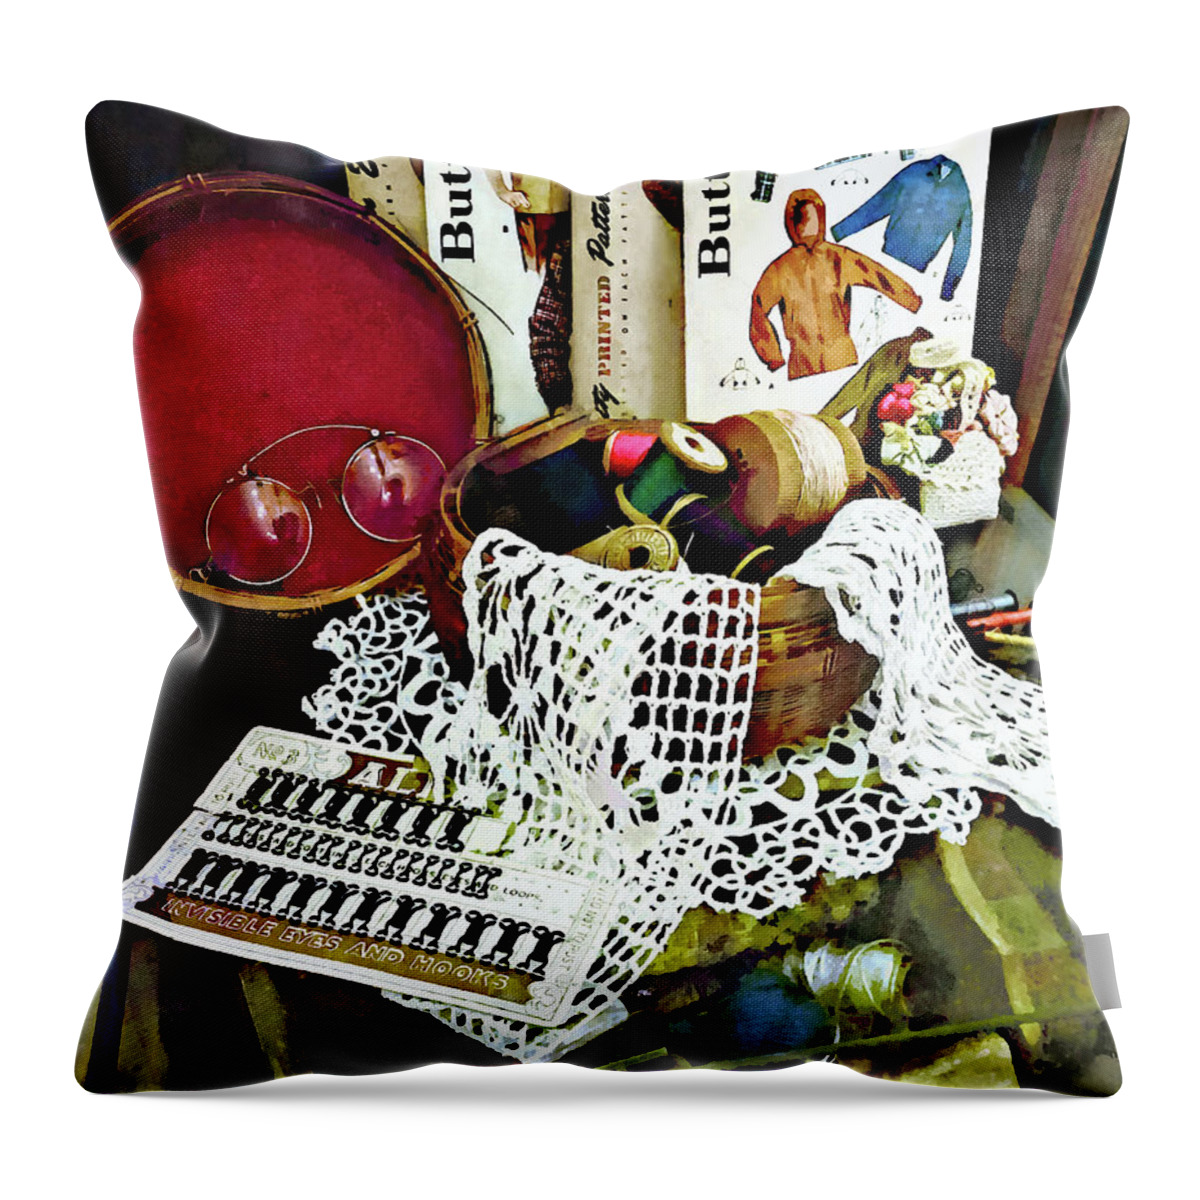 Thread Throw Pillow featuring the photograph Thread, Lace and Sewing Patterns by Susan Savad